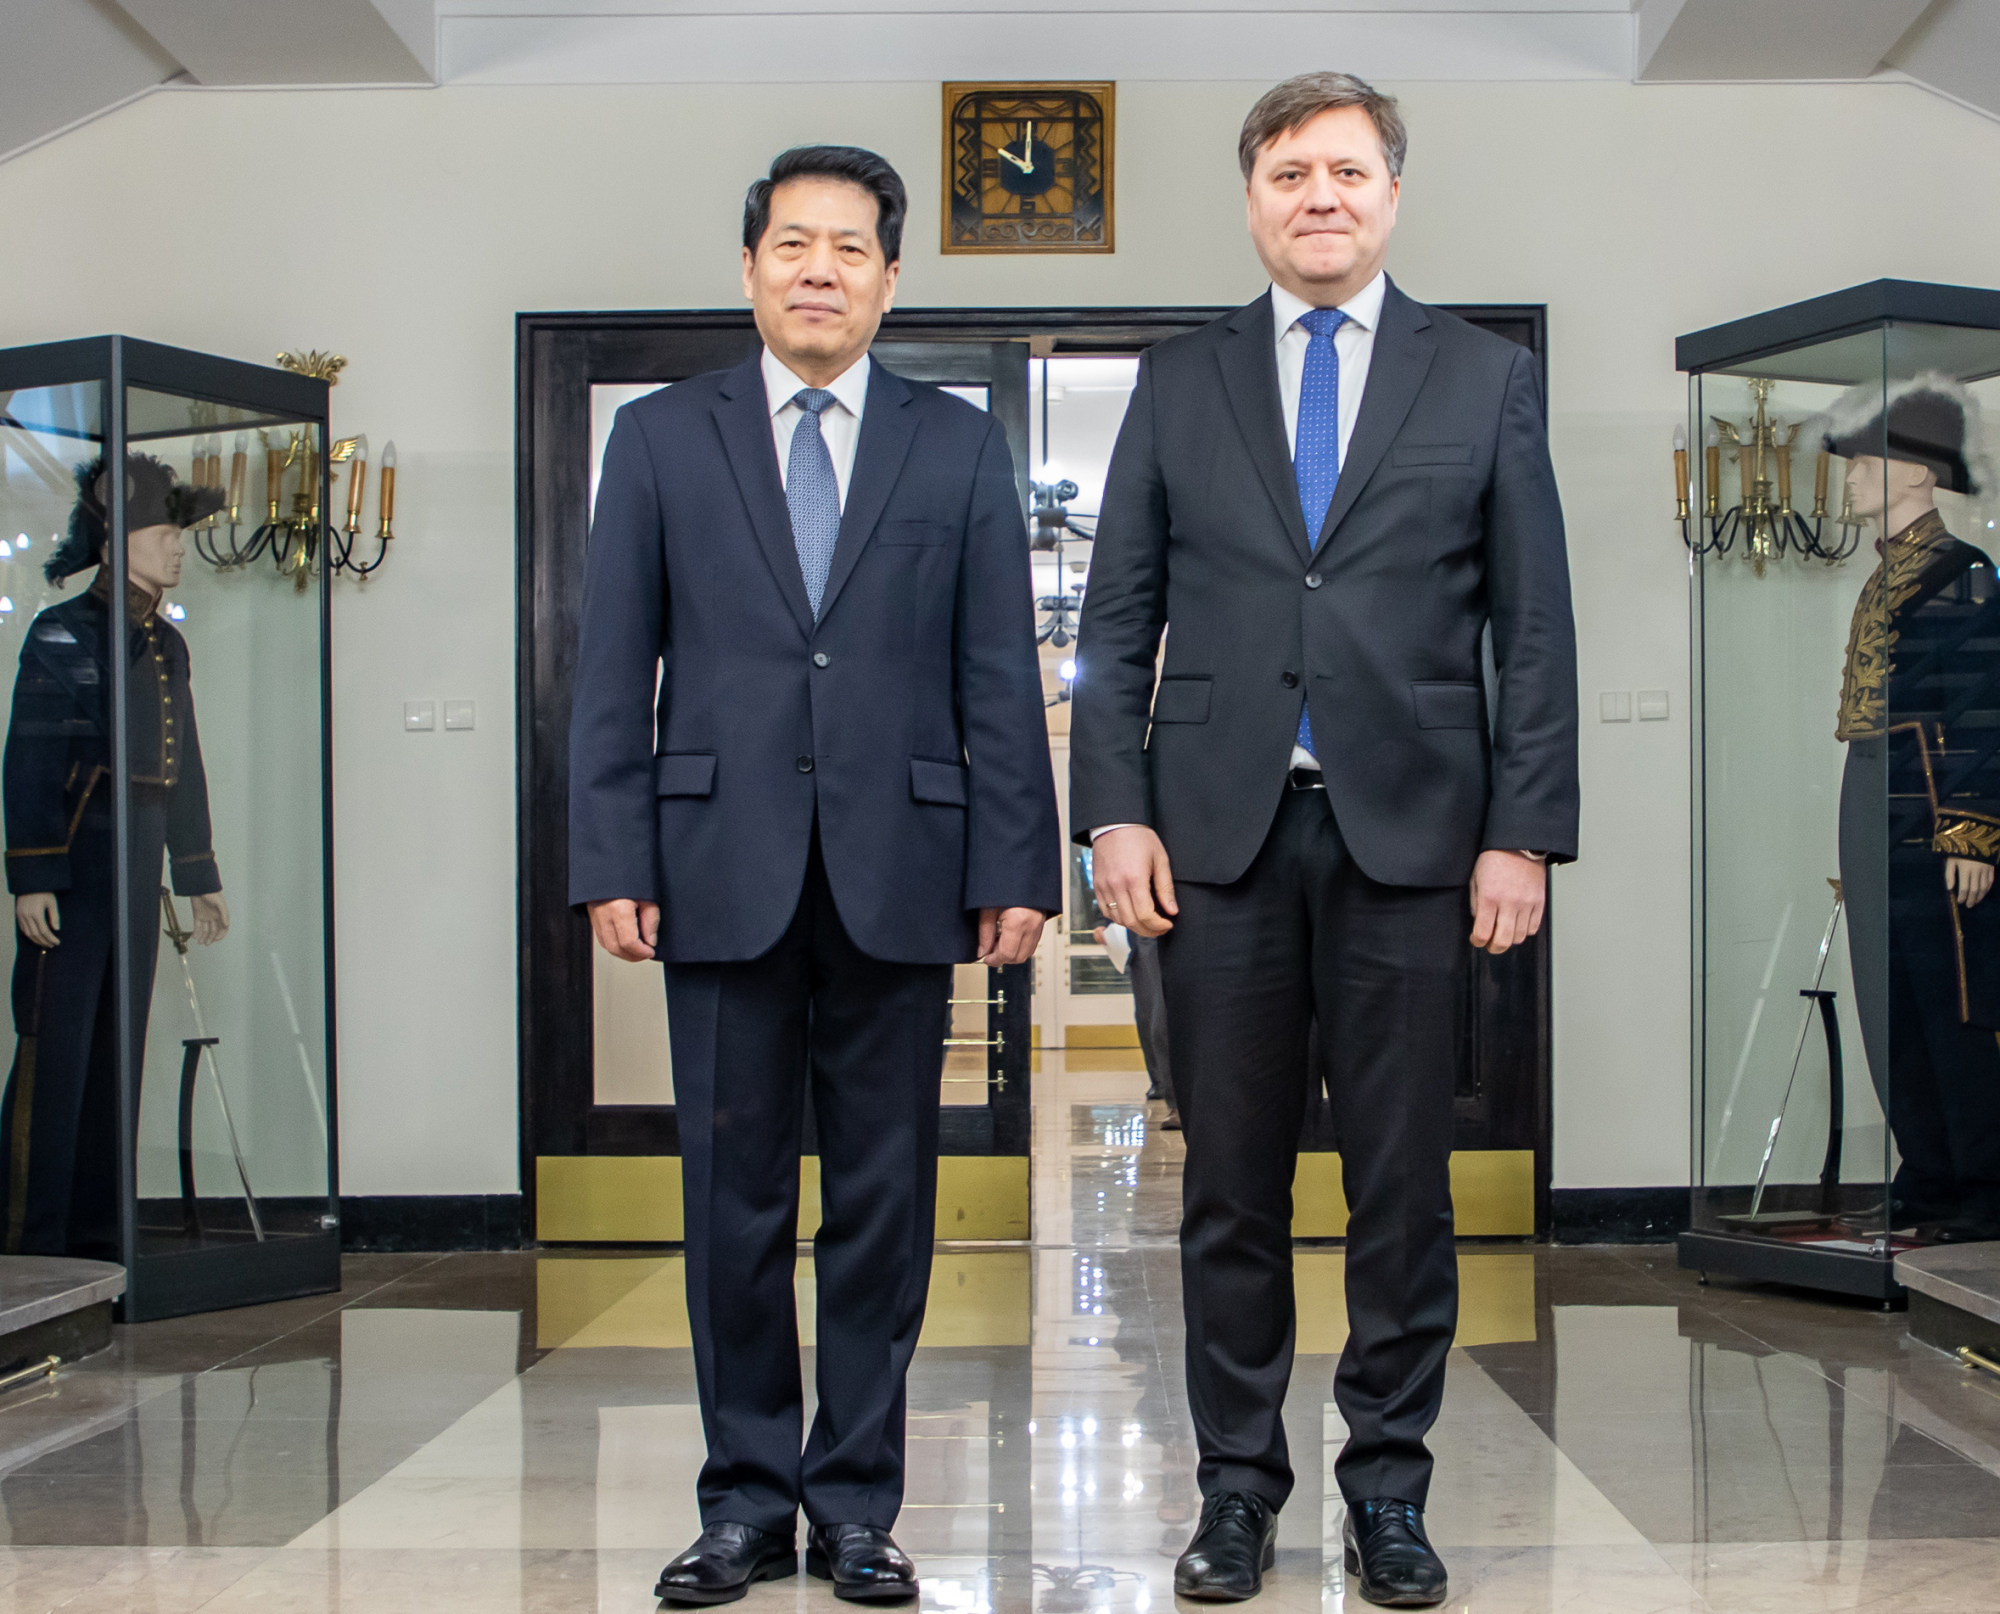 Li Hui, who is leading China’s peacemaking mission, with Polish deputy foreign minister Wojciech Gerwel on May 19. Photo: Poland Embassy in China